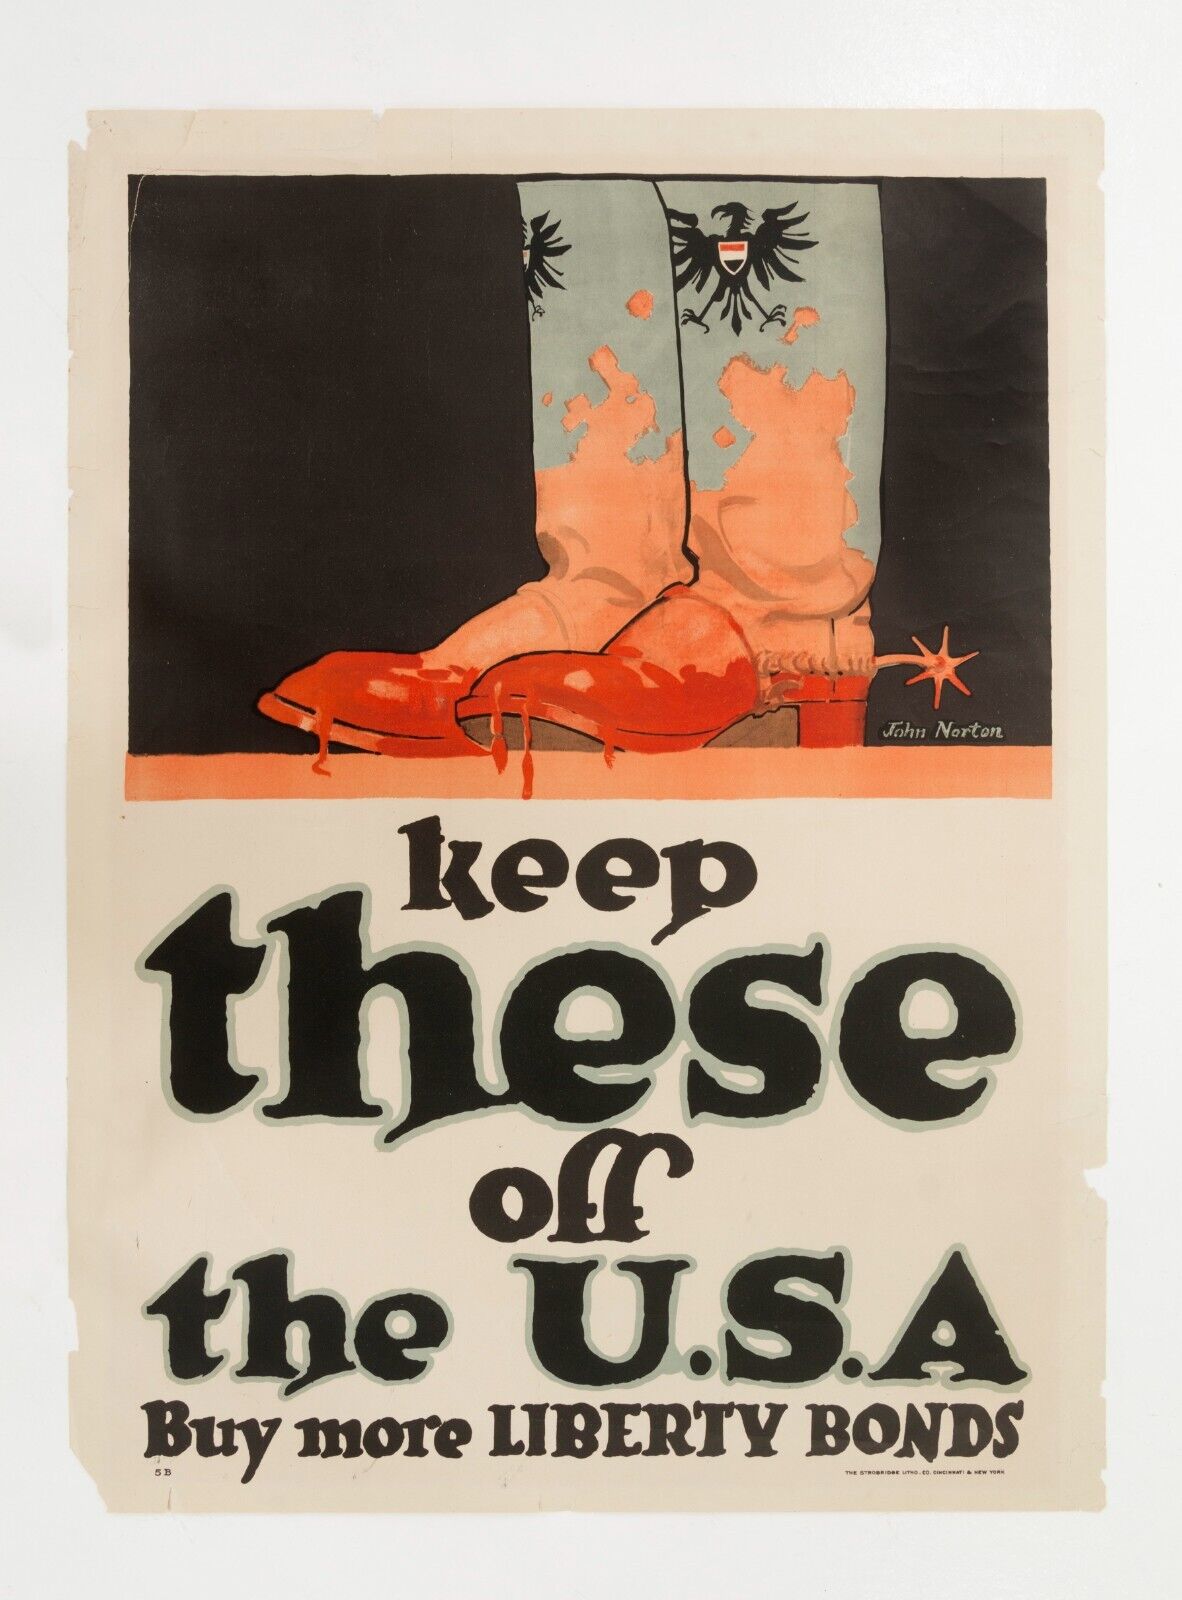 1918 Keep these off the USA Buy more Liberty Bonds vintage American WW1 poster